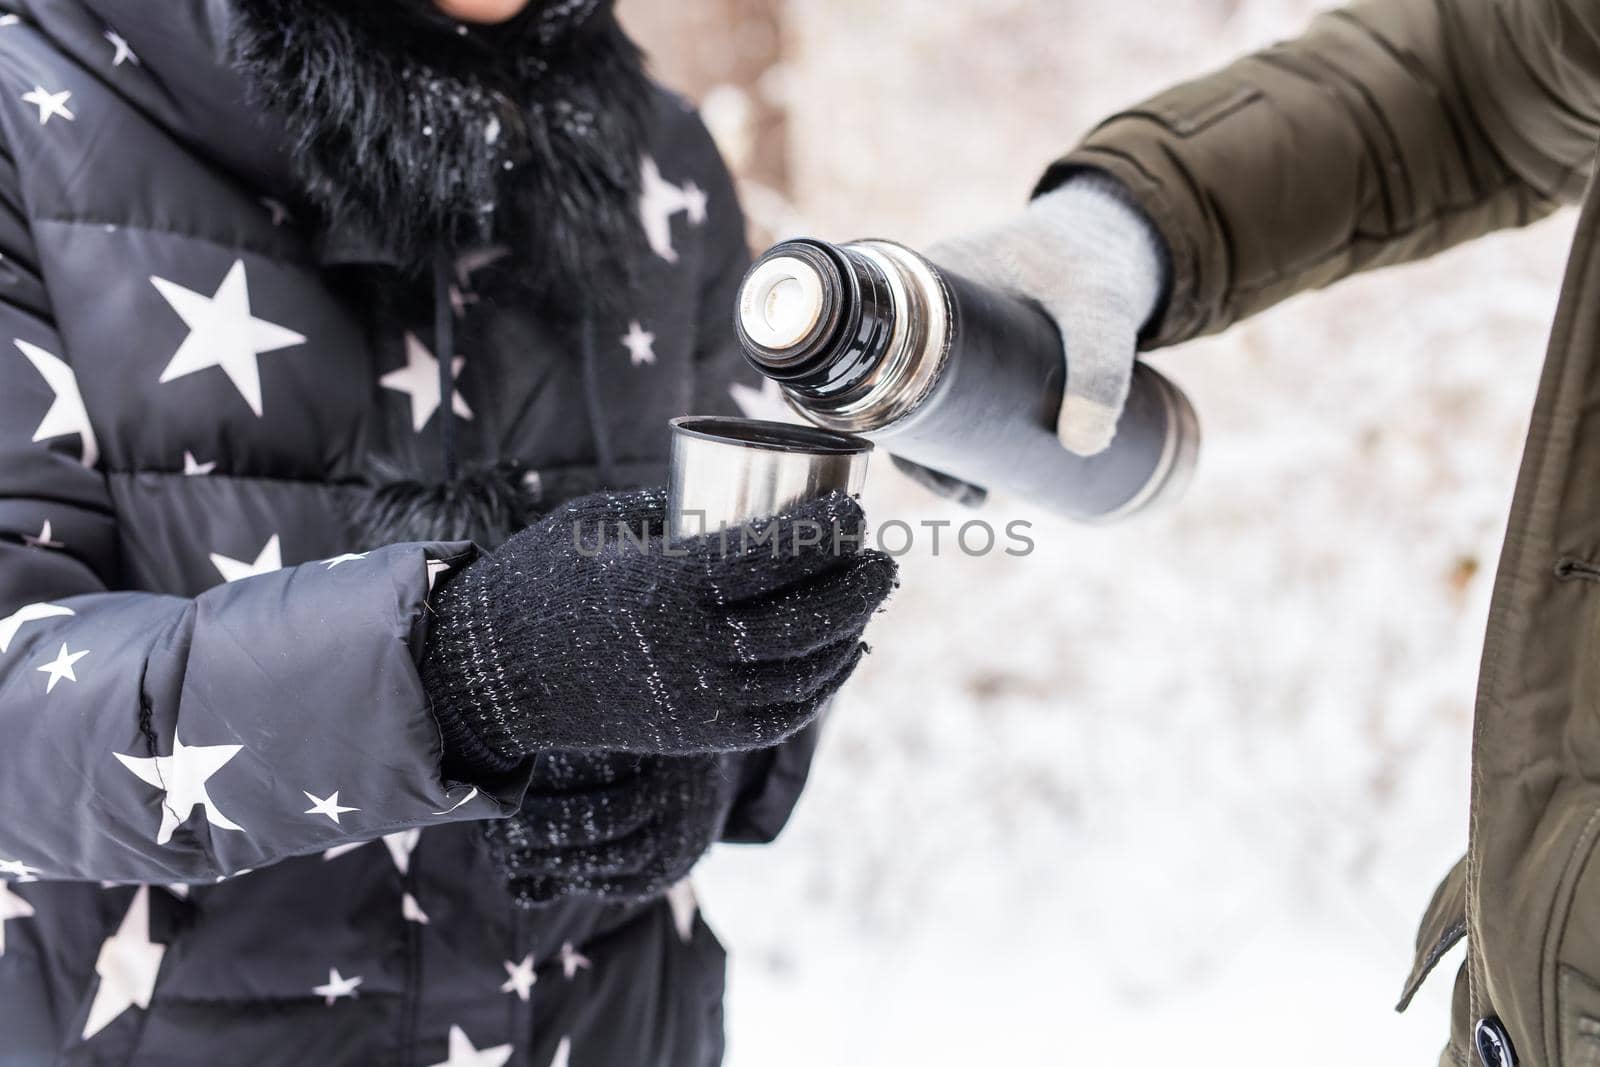 Thermos and cold season concept - A woman pours a hot drink. Couple on a winter holiday by Satura86